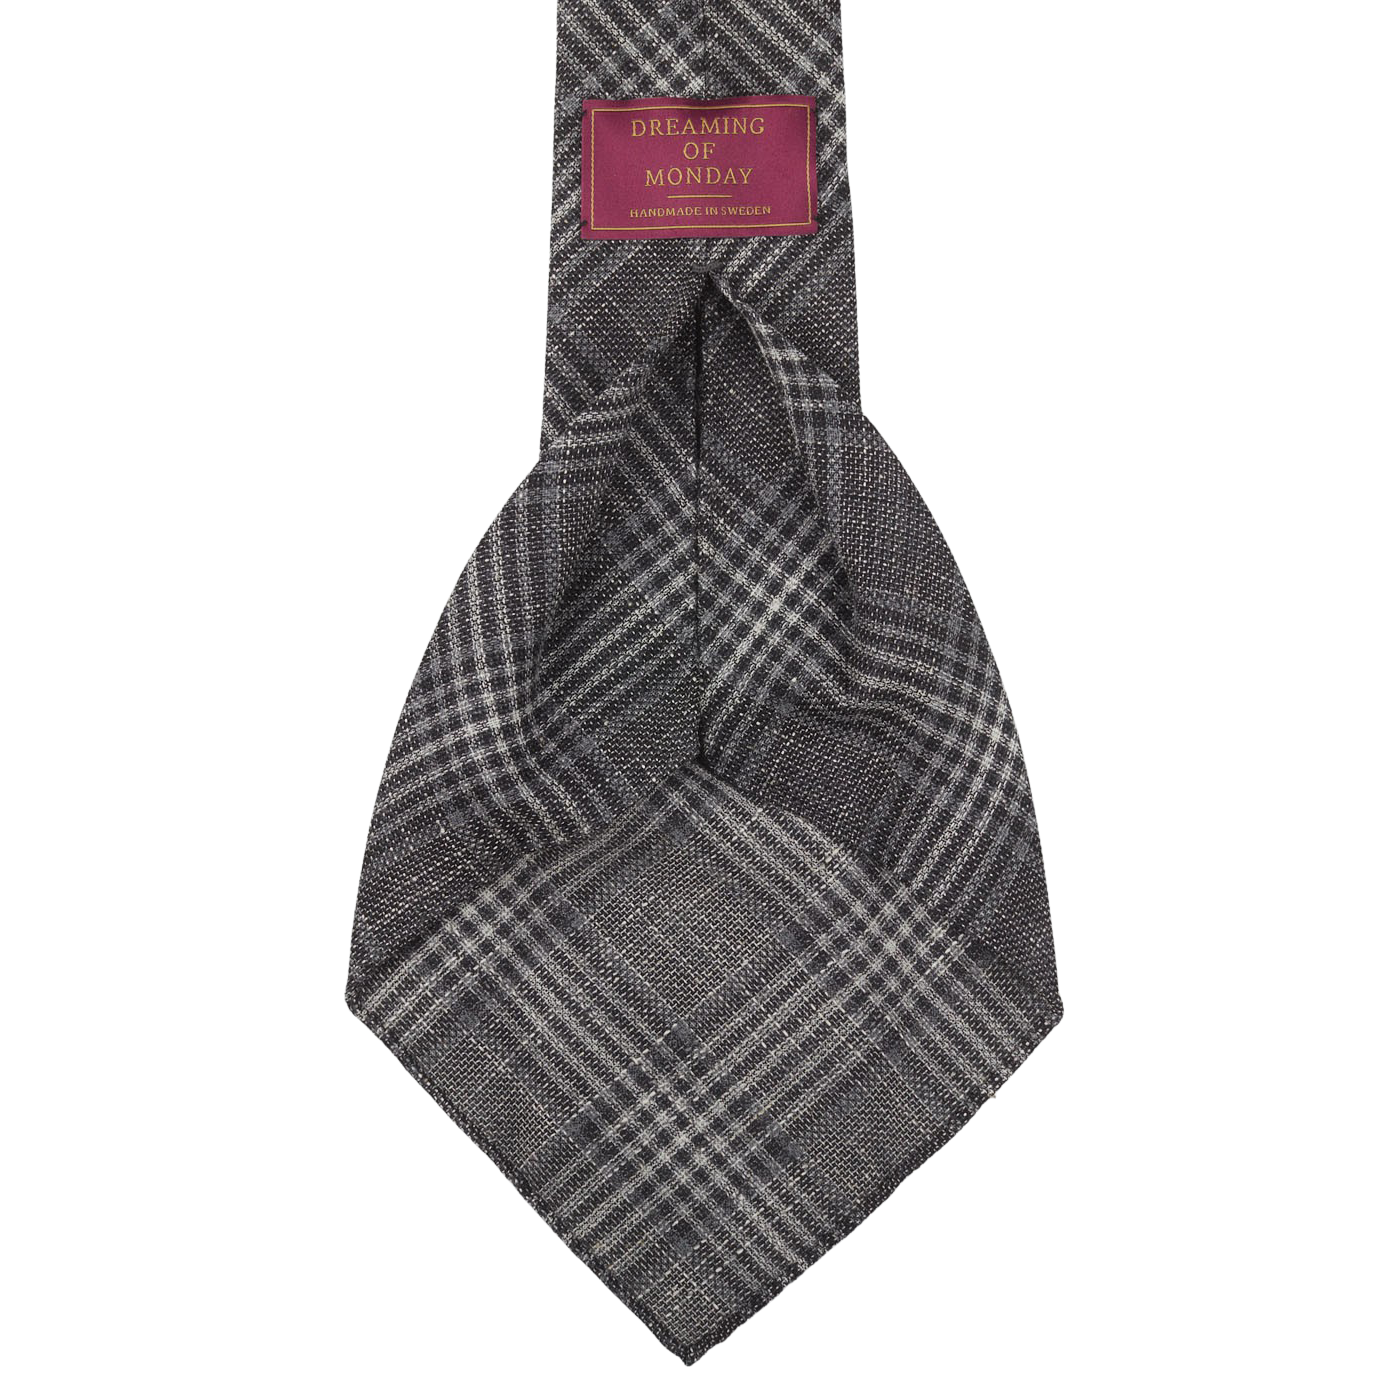 Dreaming of Monday Grey Checked 7-Fold Vintage Wool Tie Open